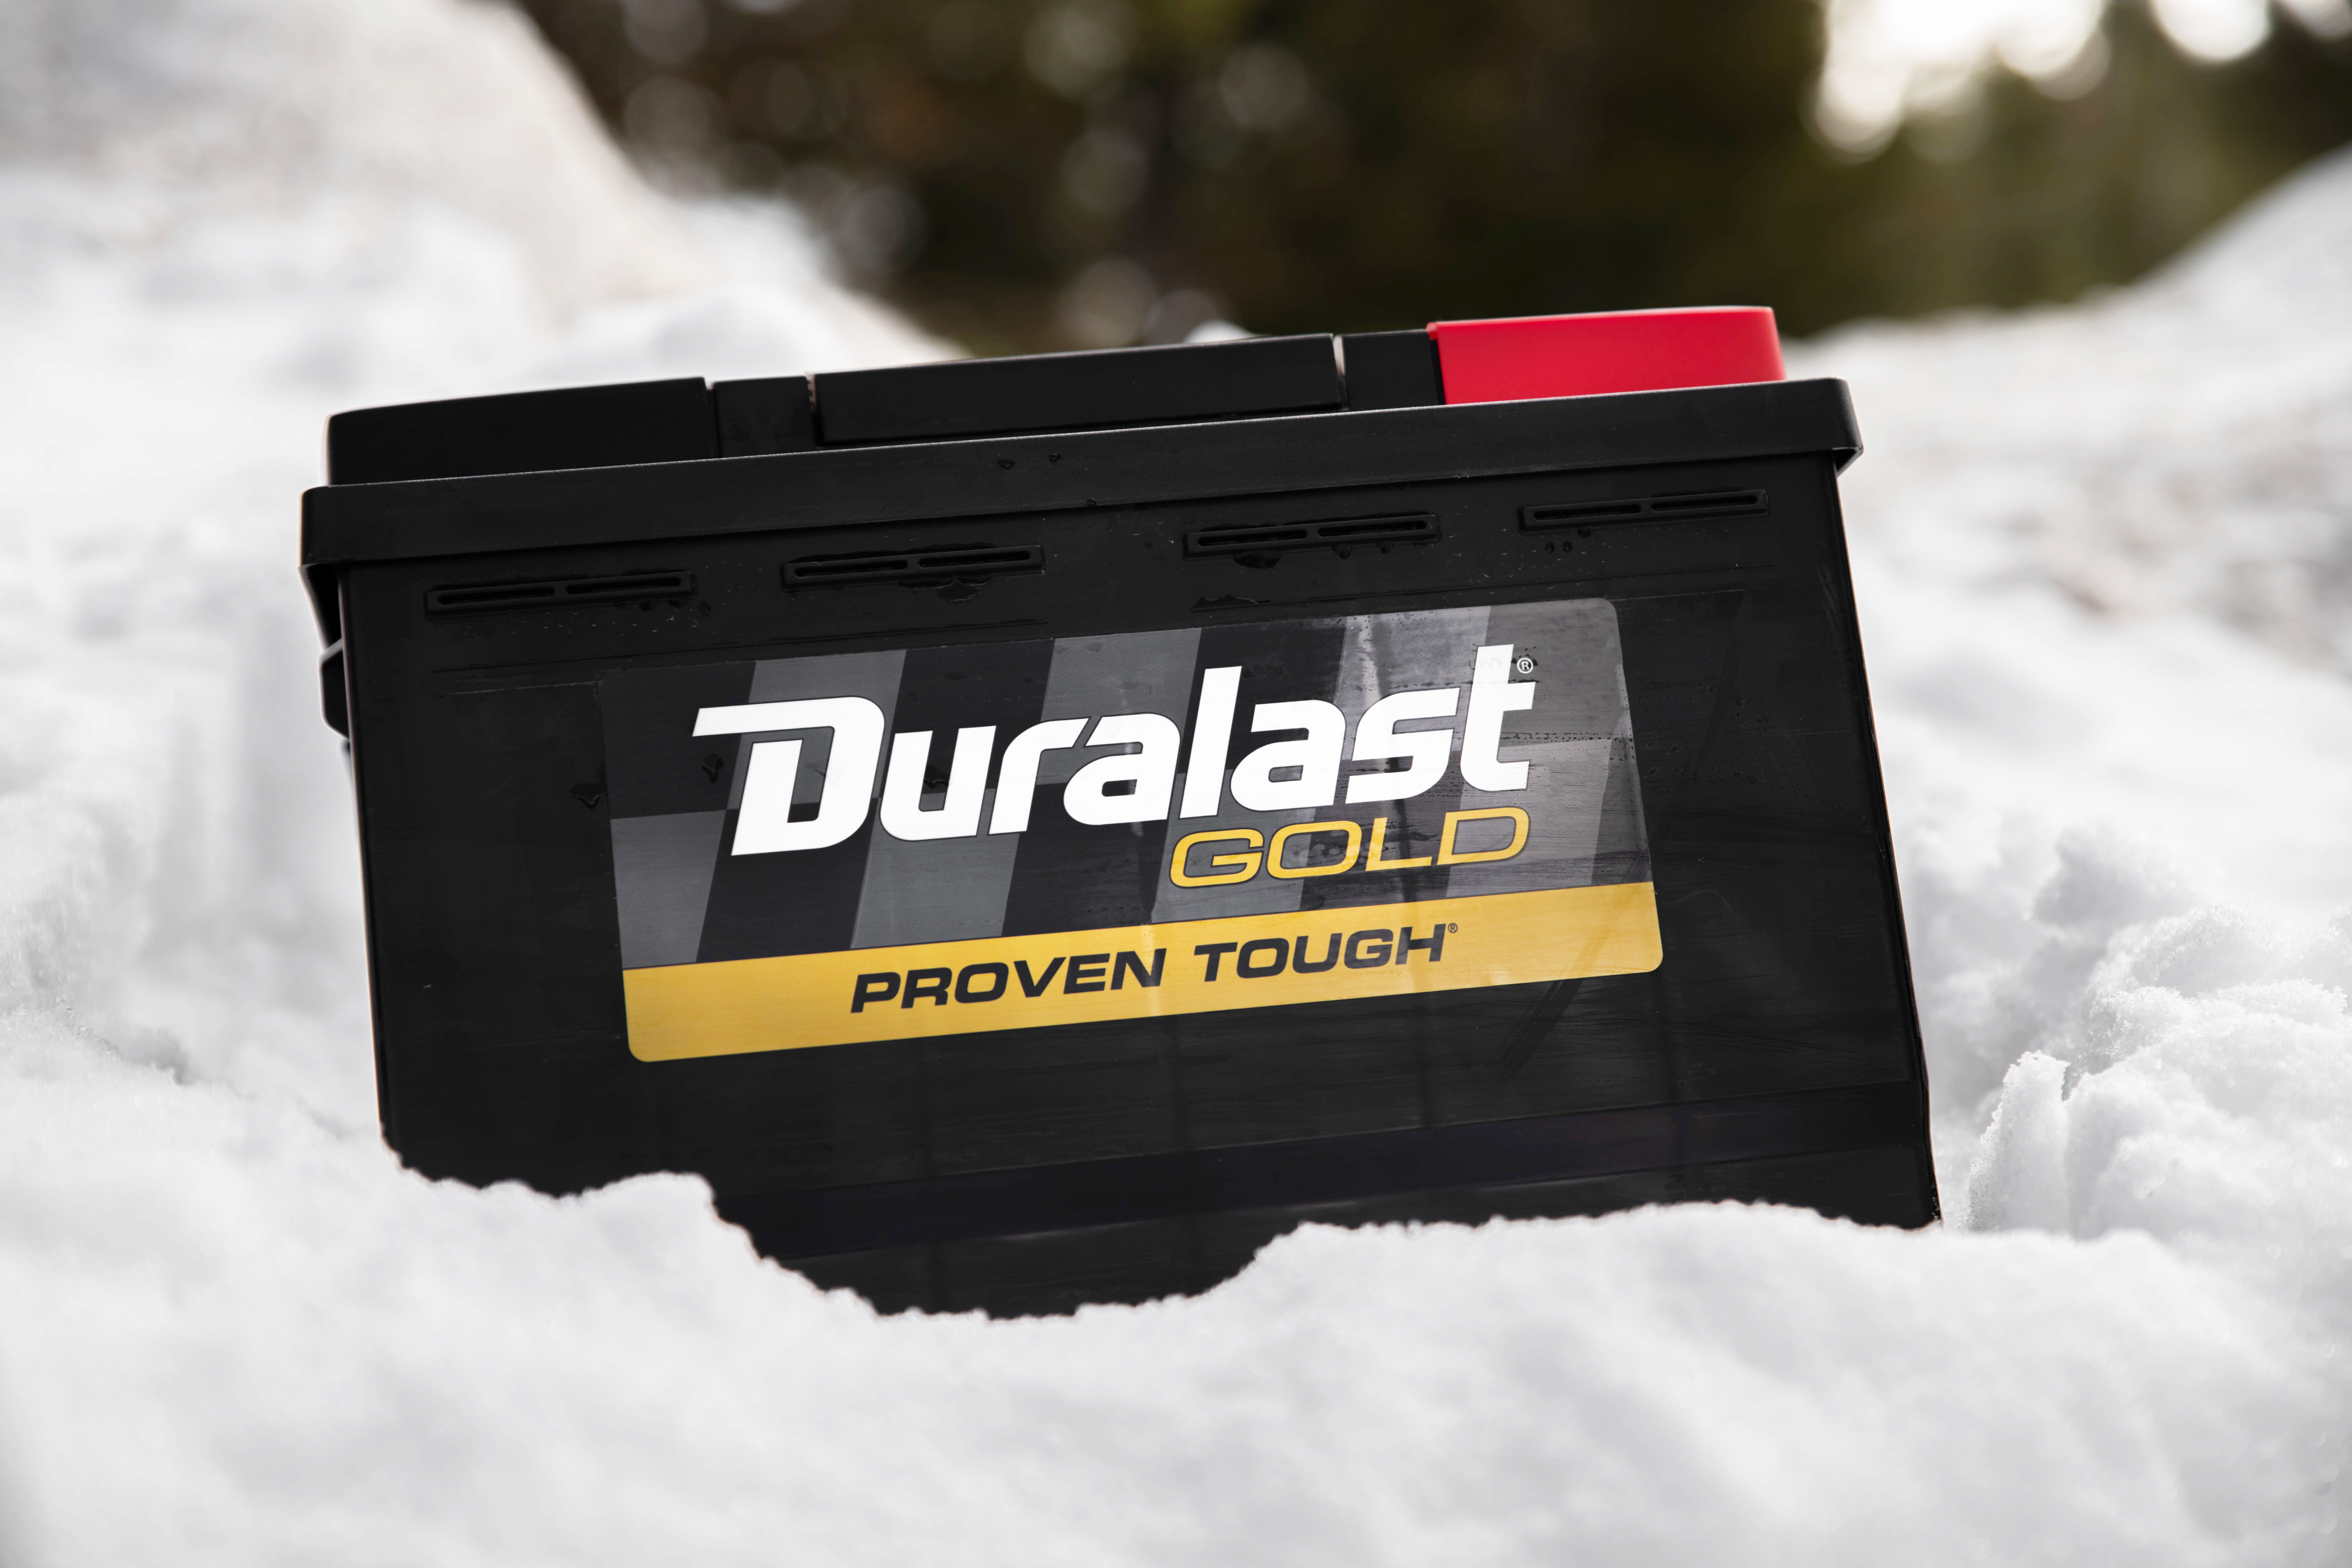 11 winter car essentials you can find on  that may save your life